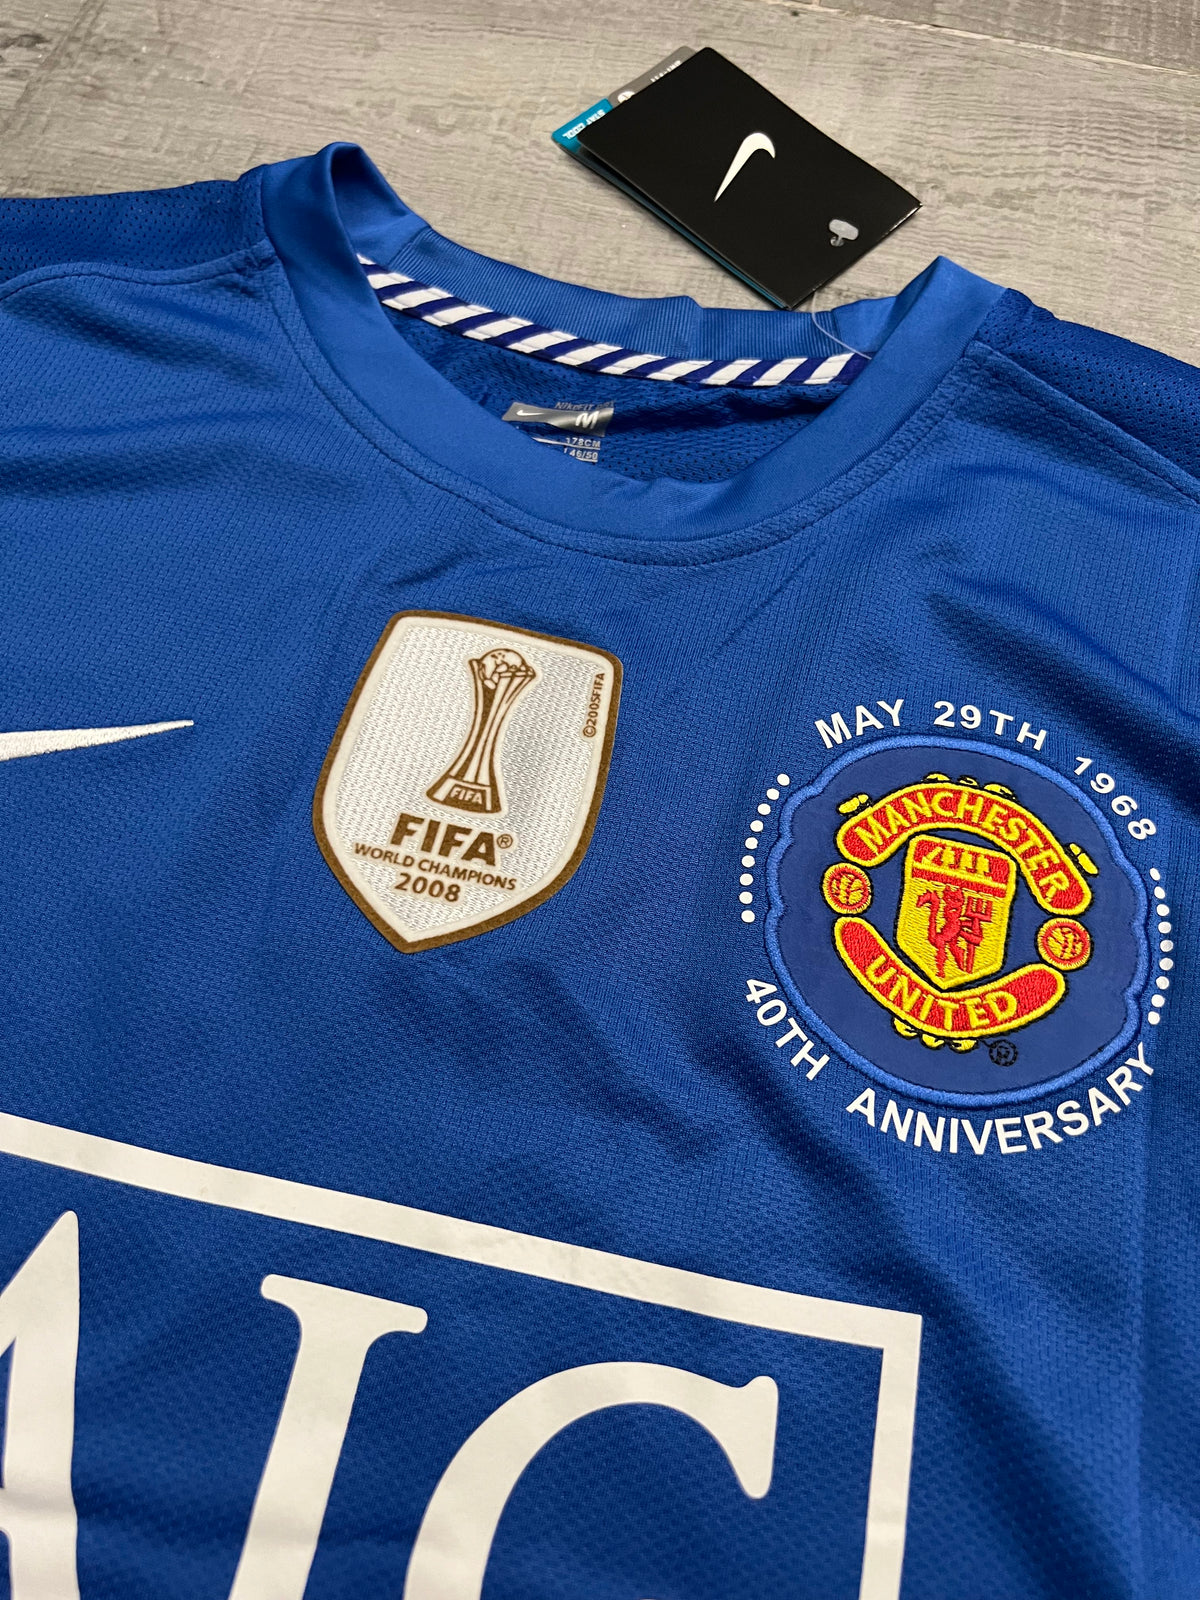 manchester united jersey 40th anniversary